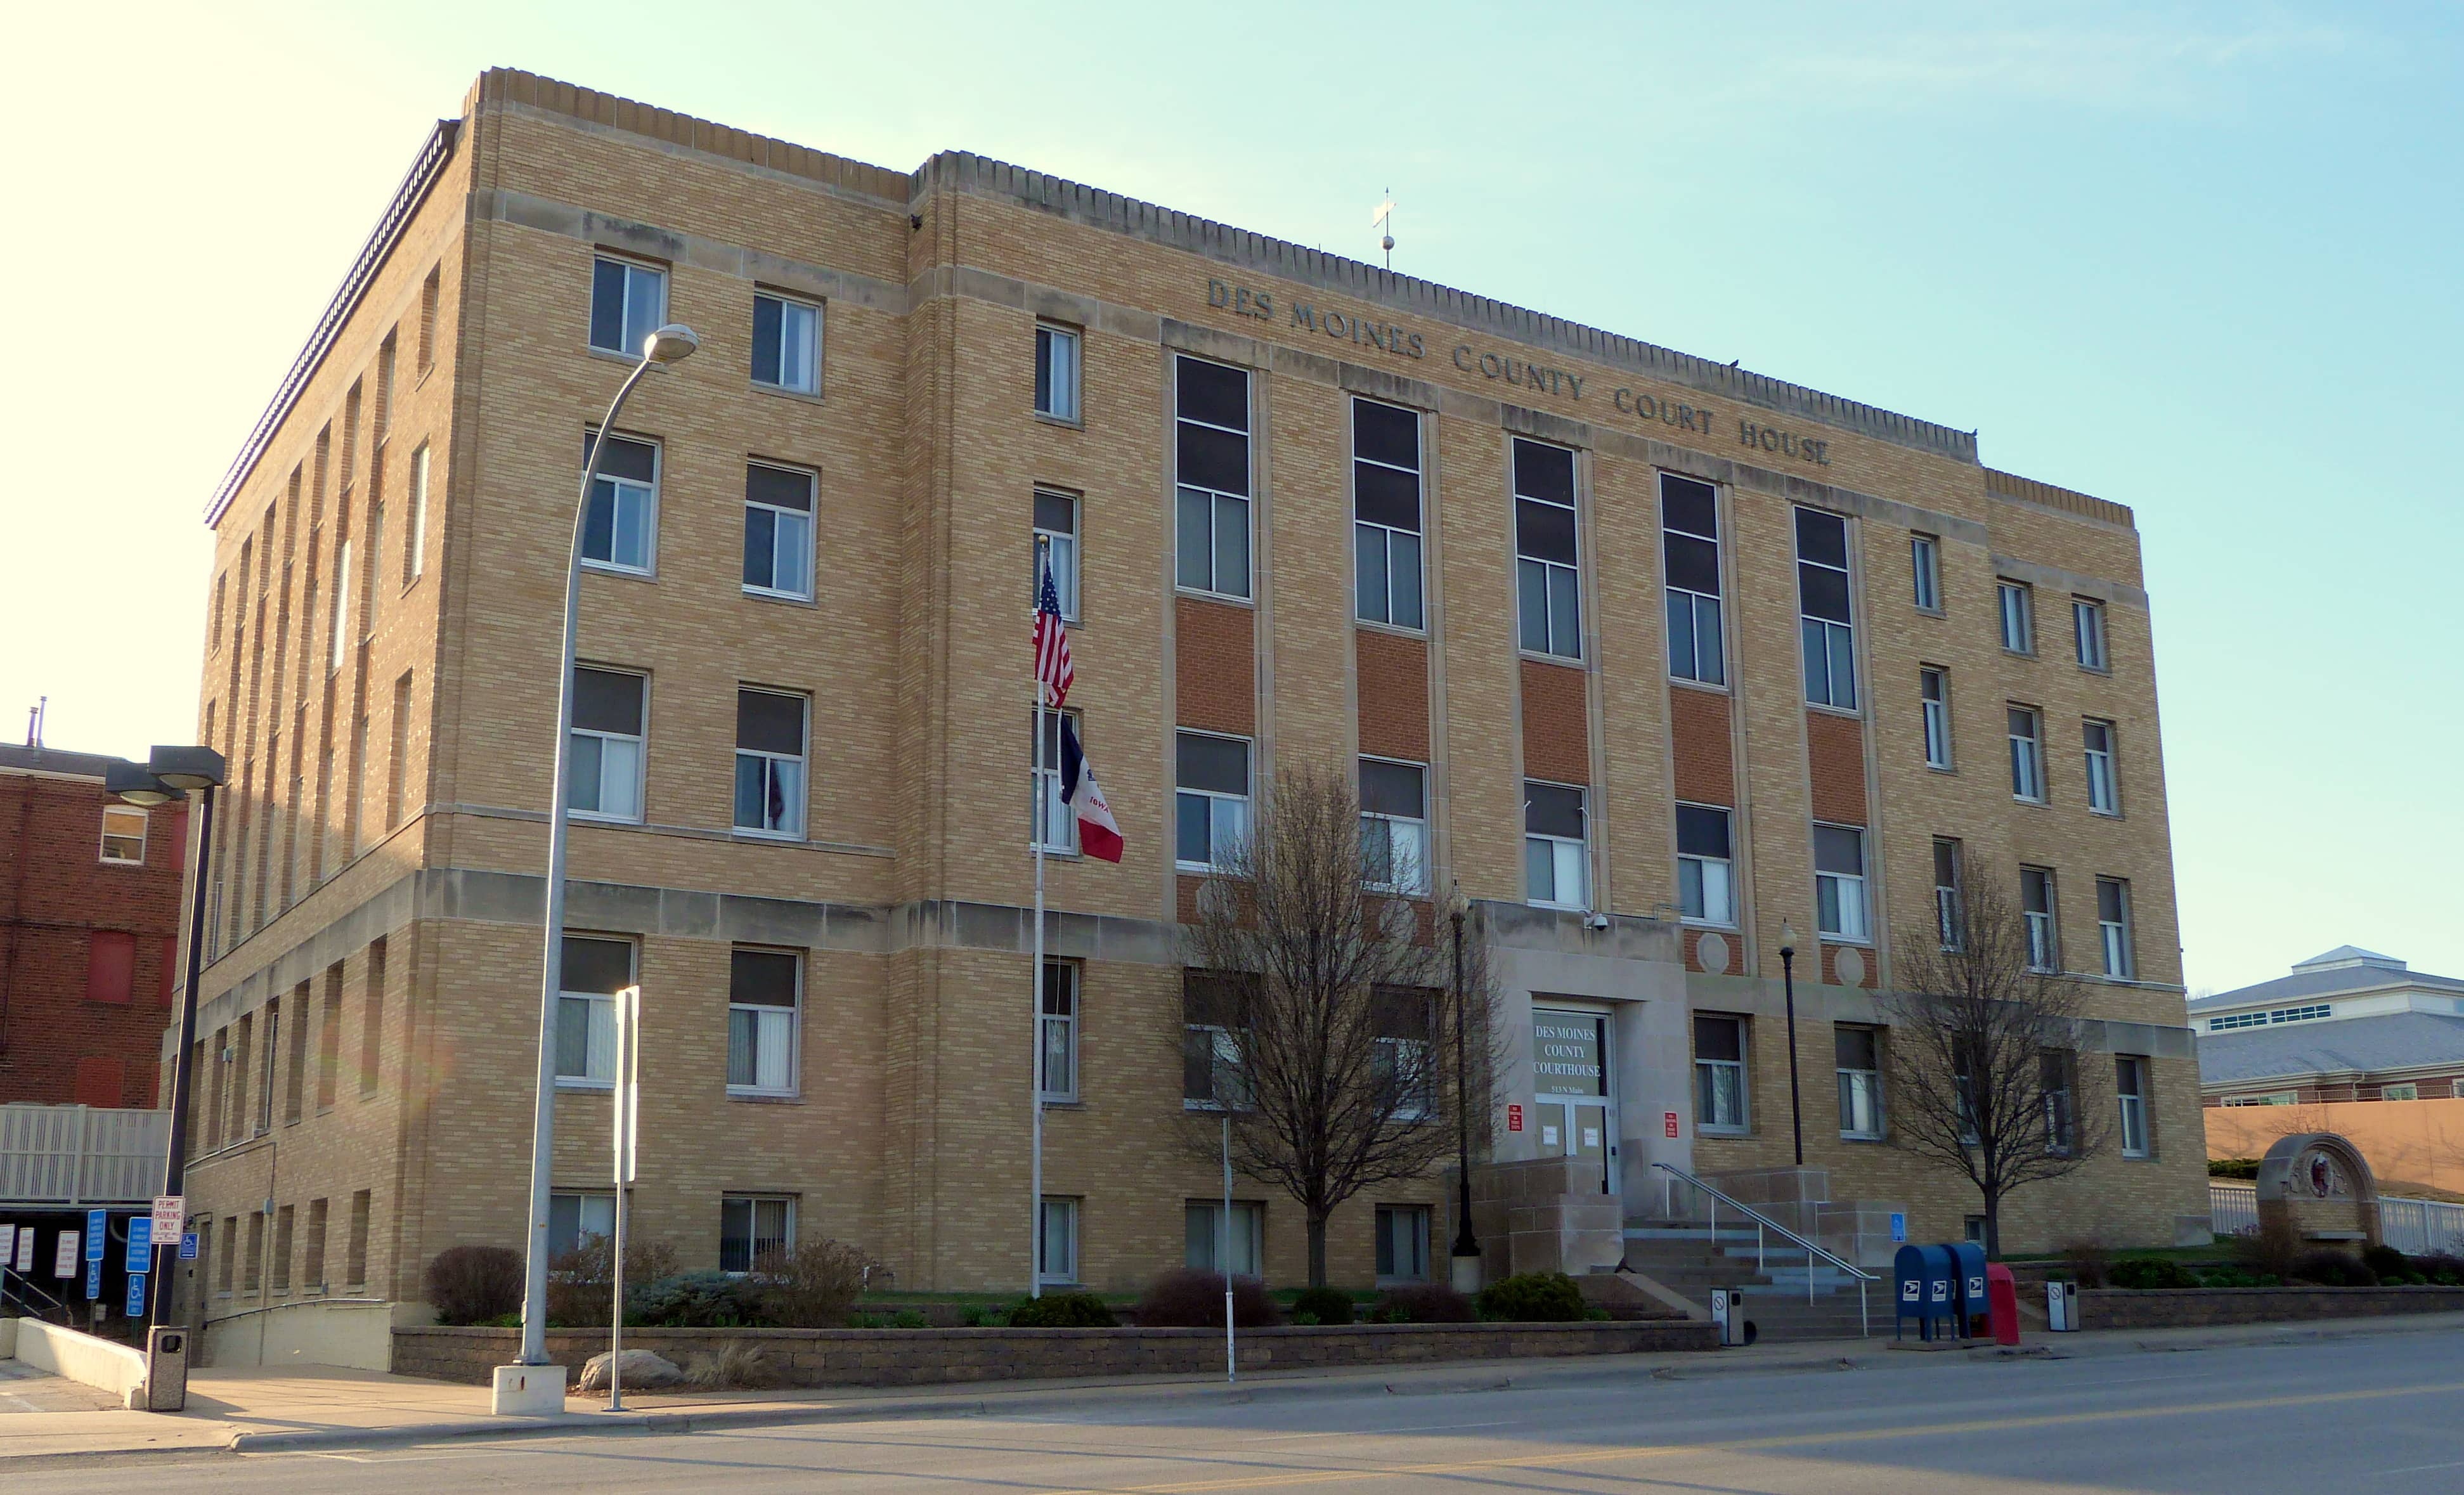 Image of Des Moines County District Court